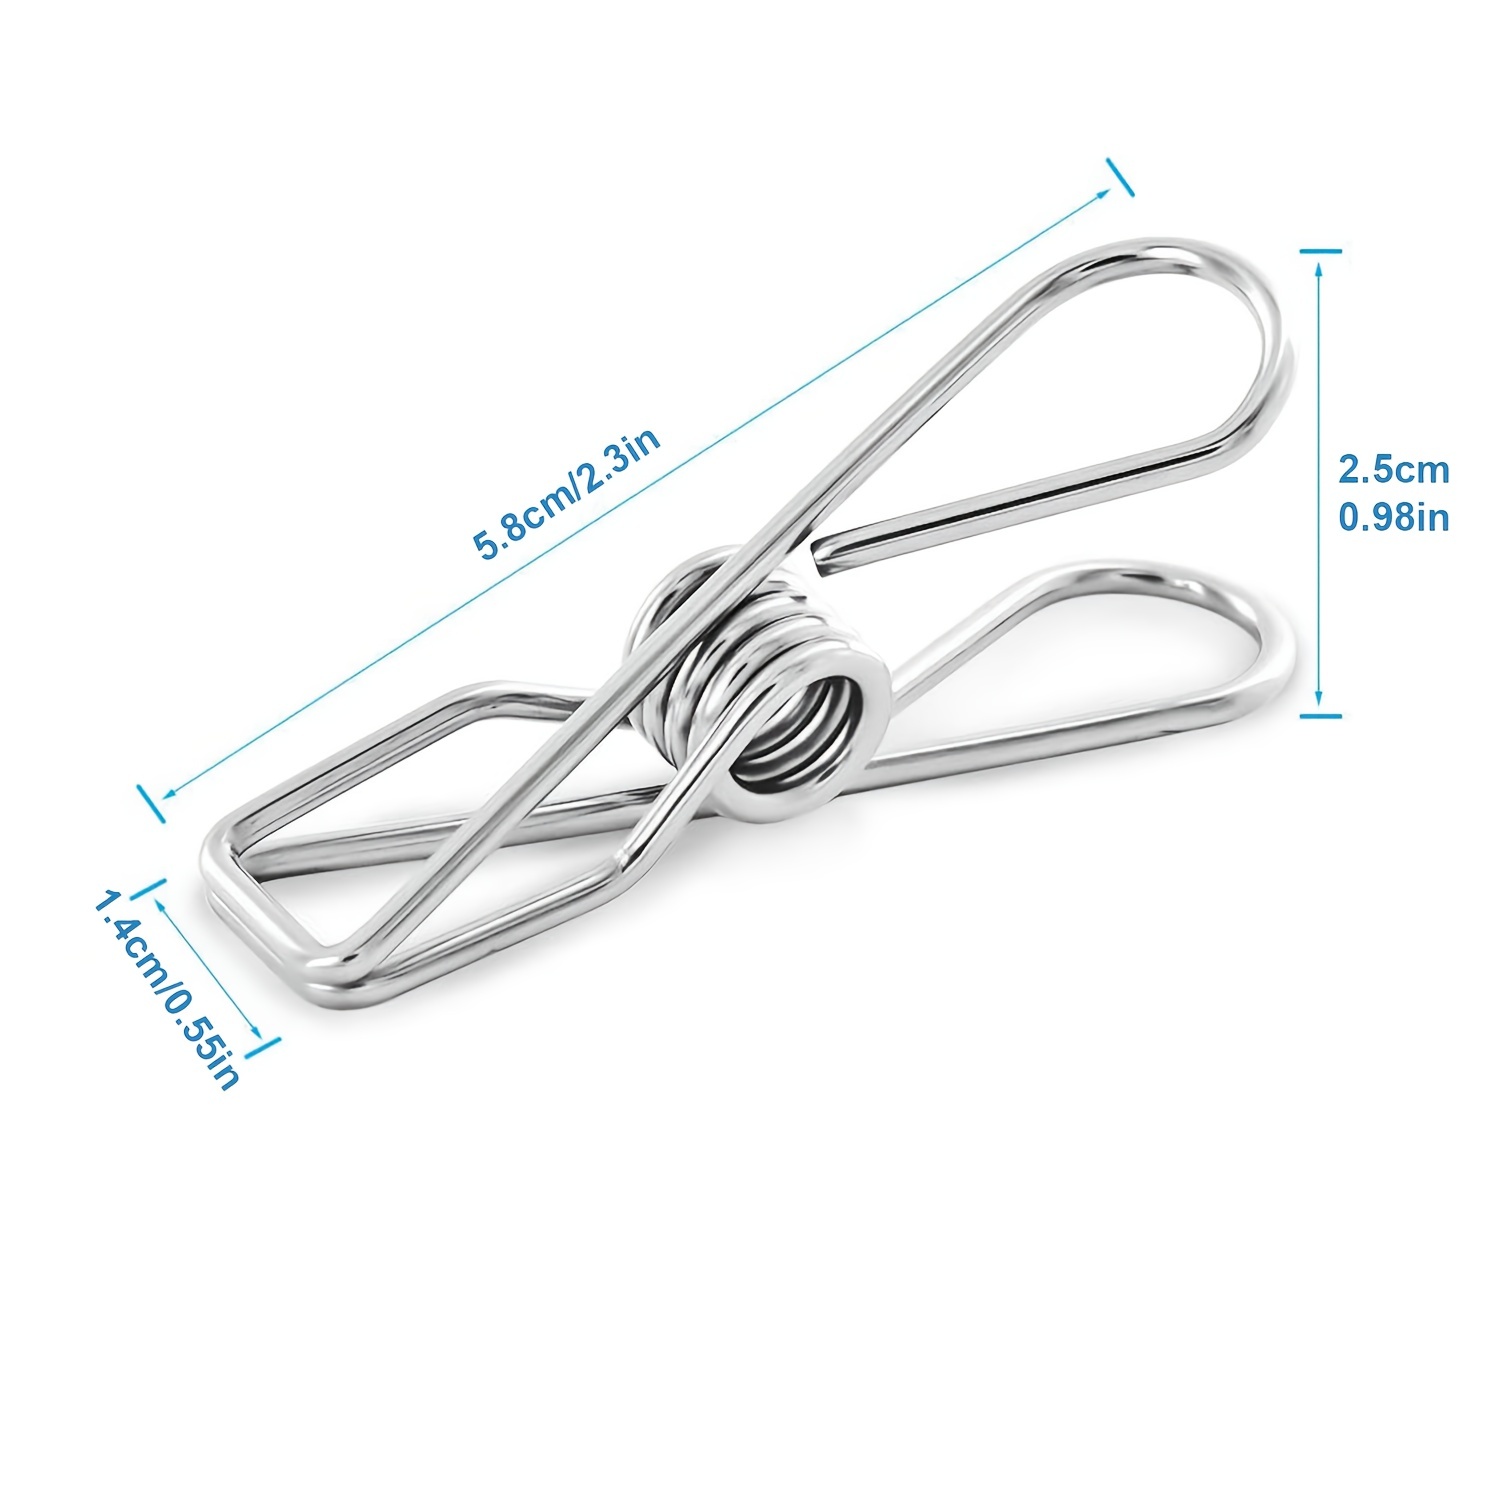 Metal SILVER Cloth Hanger Hooks Laundry Hook Clothes pins pegs